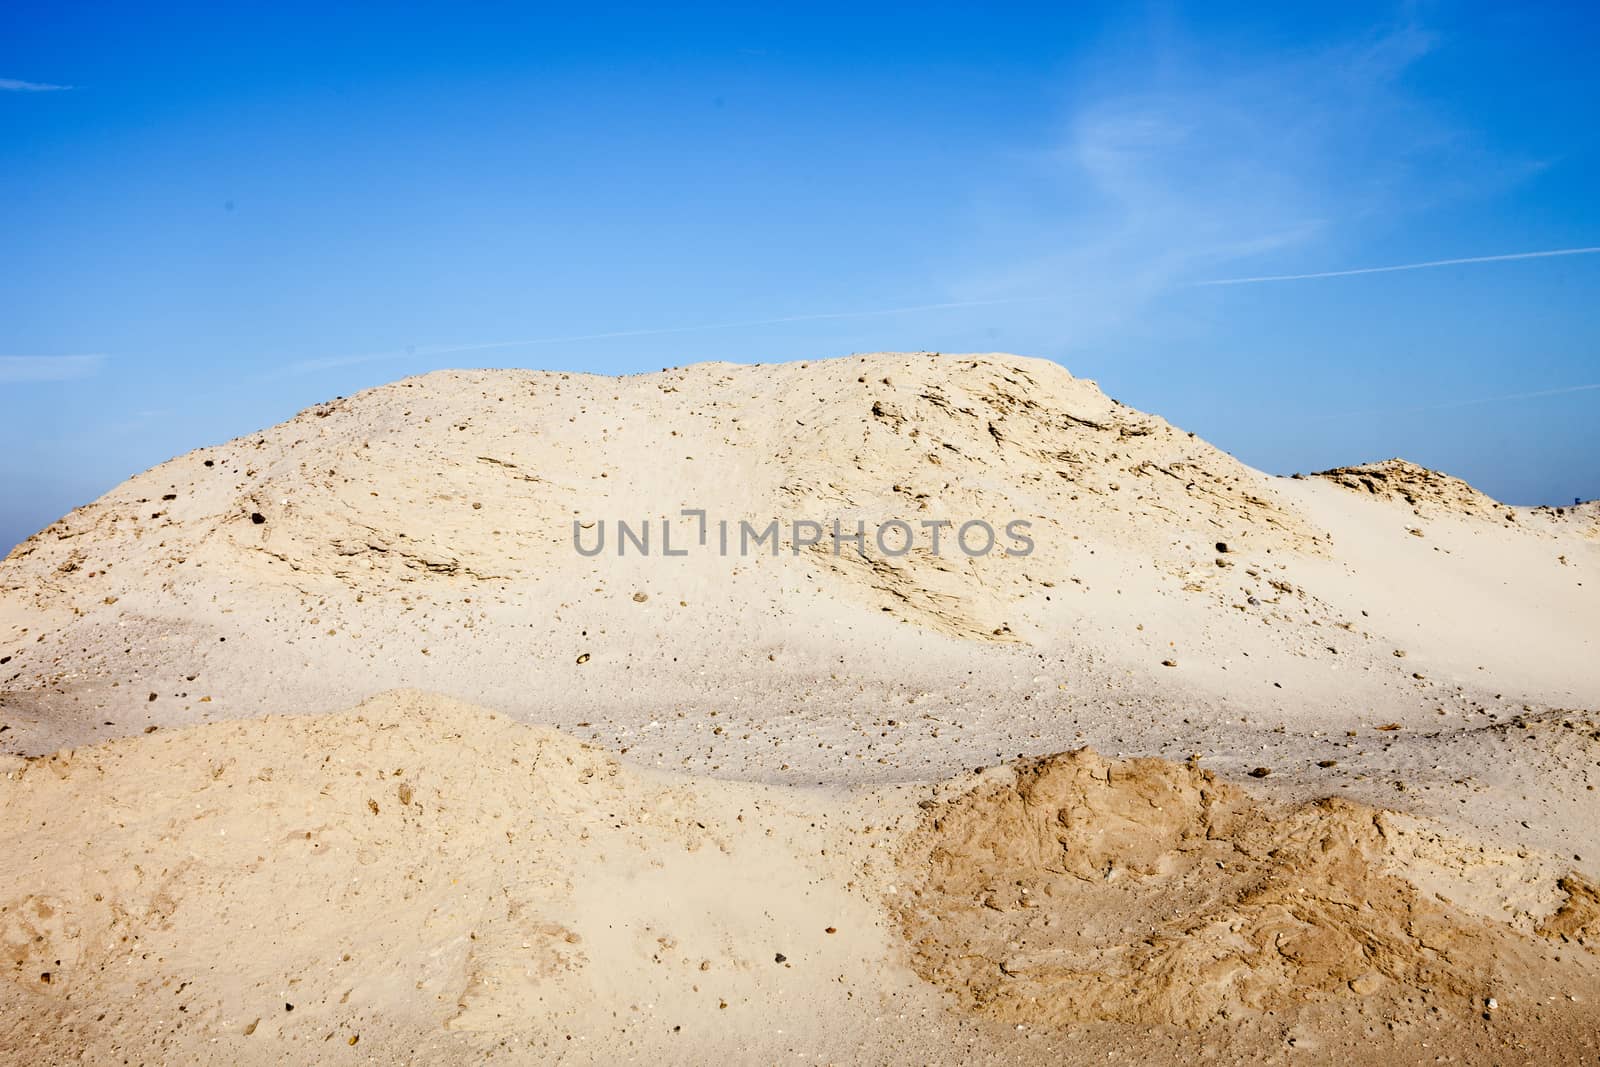 Pile of sand and blue sky over it.